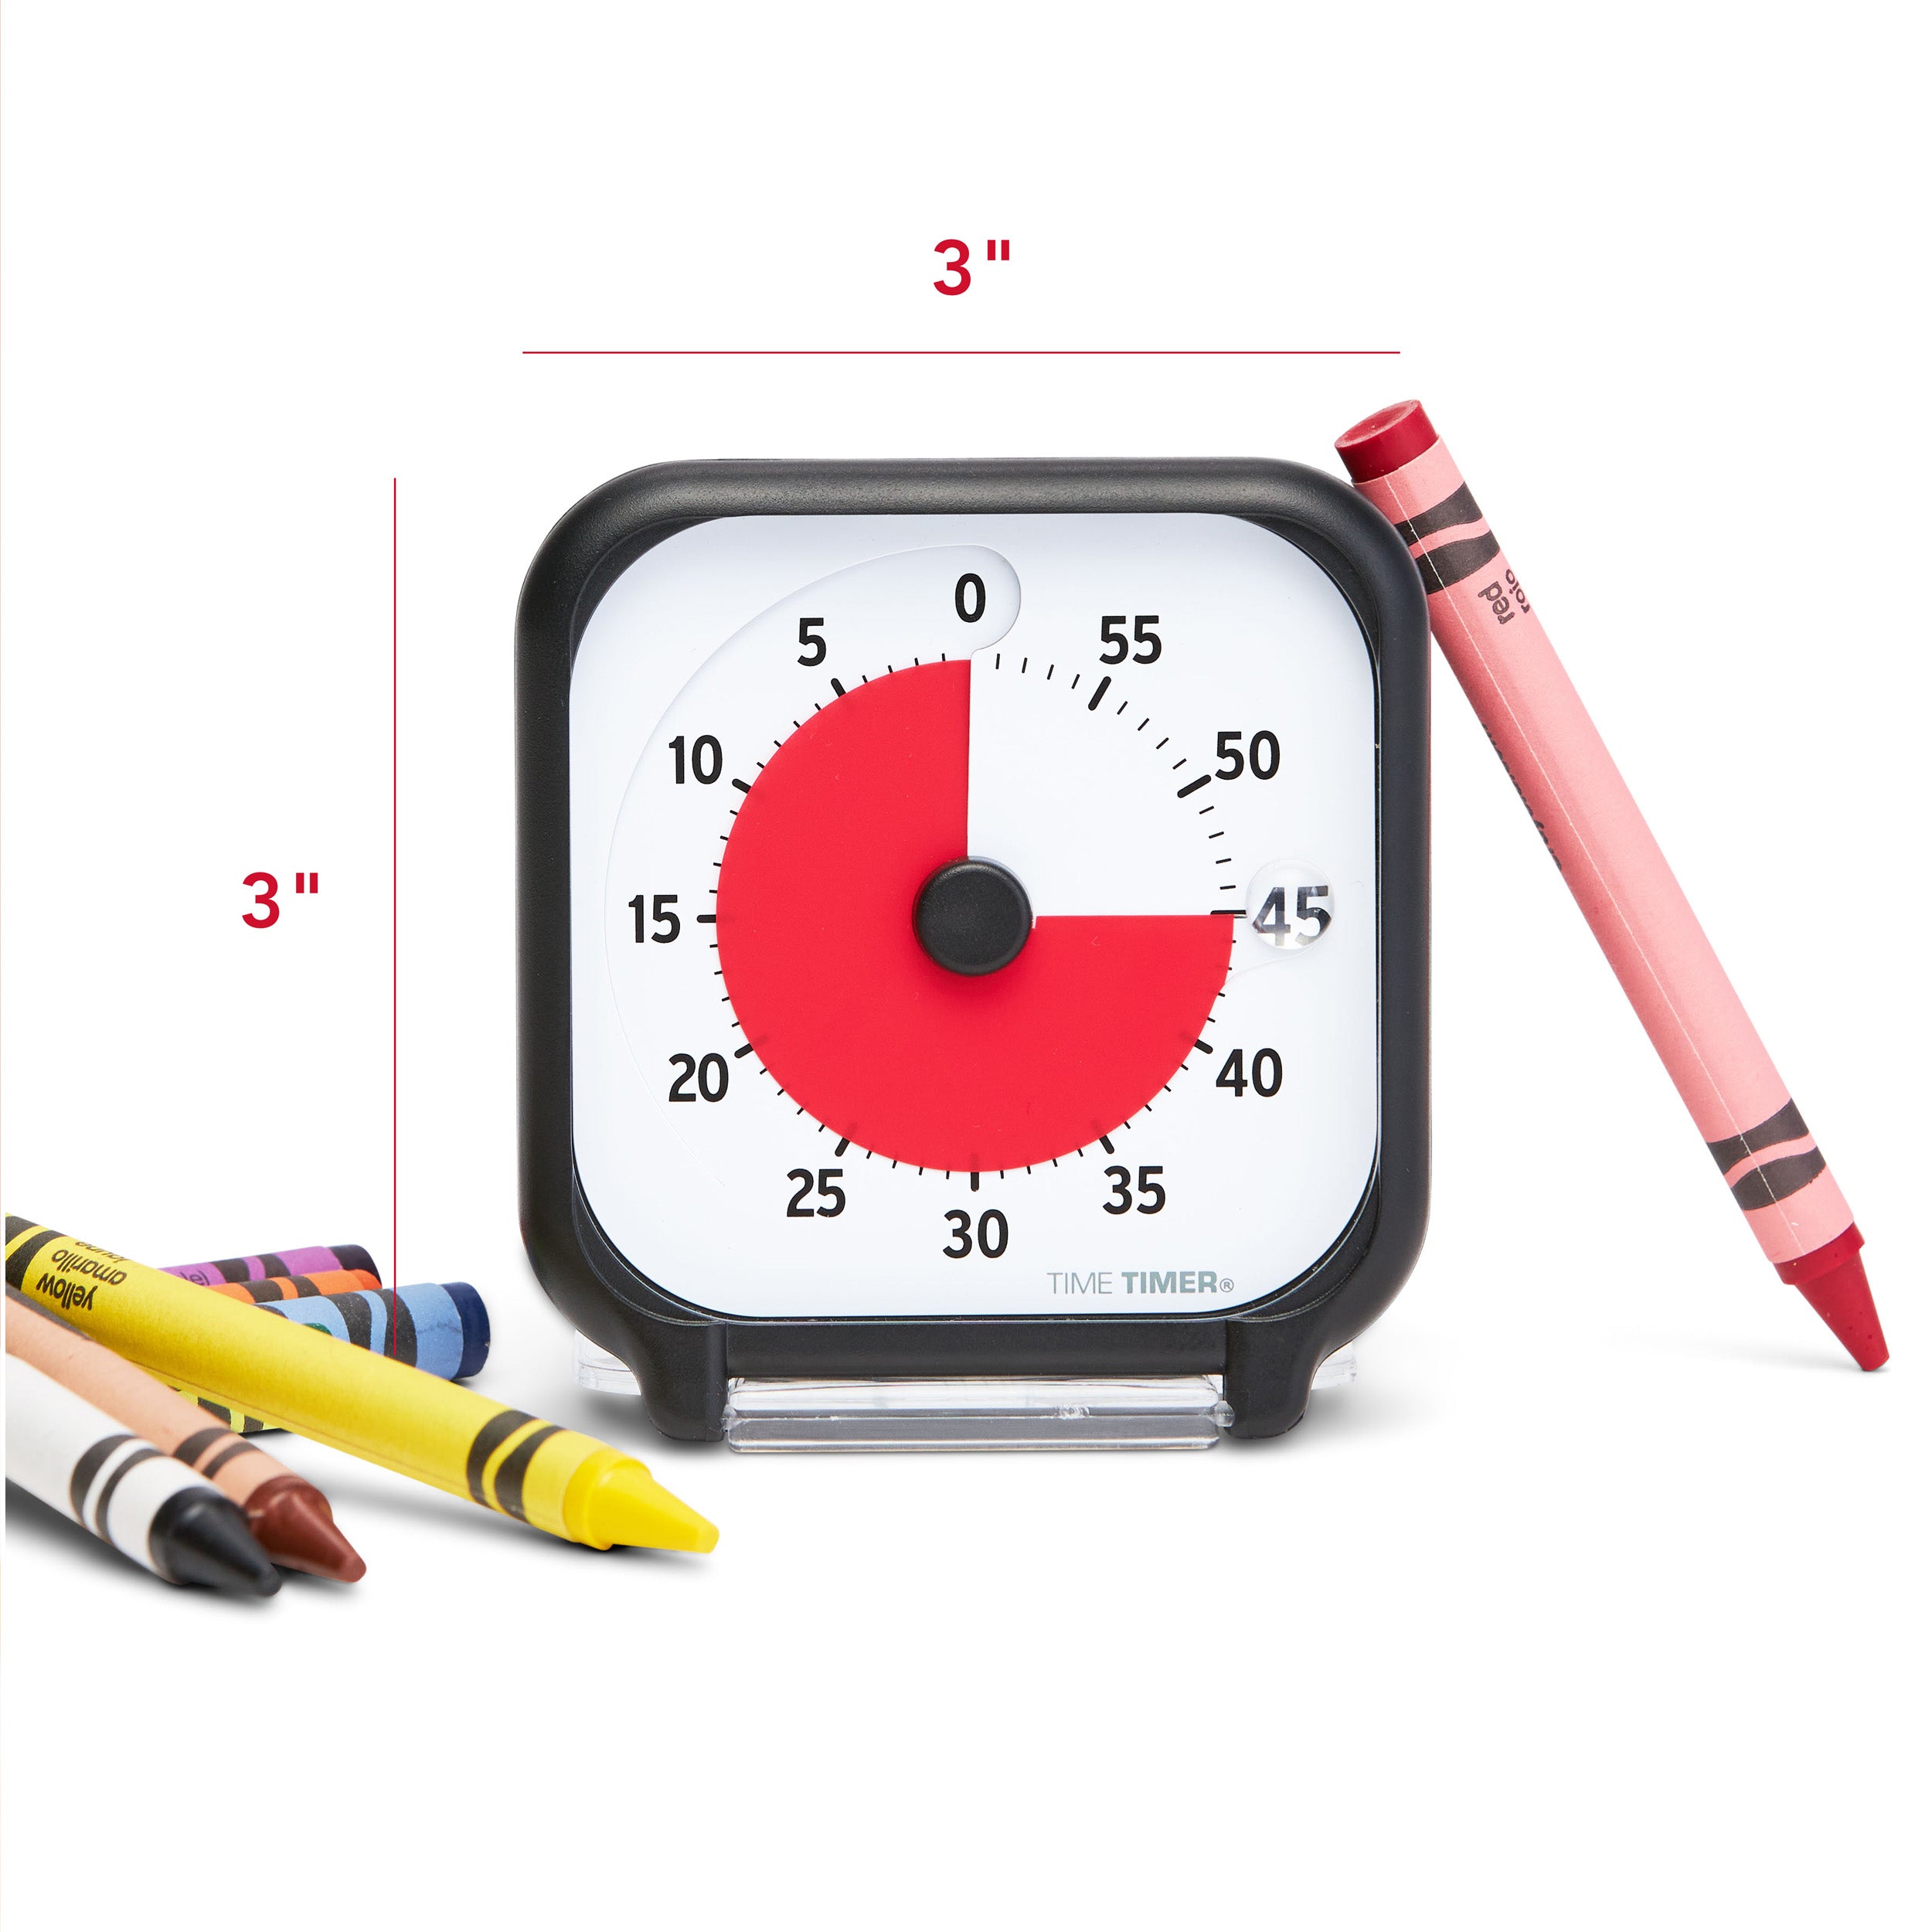 Awesome countdown timers for the classroom